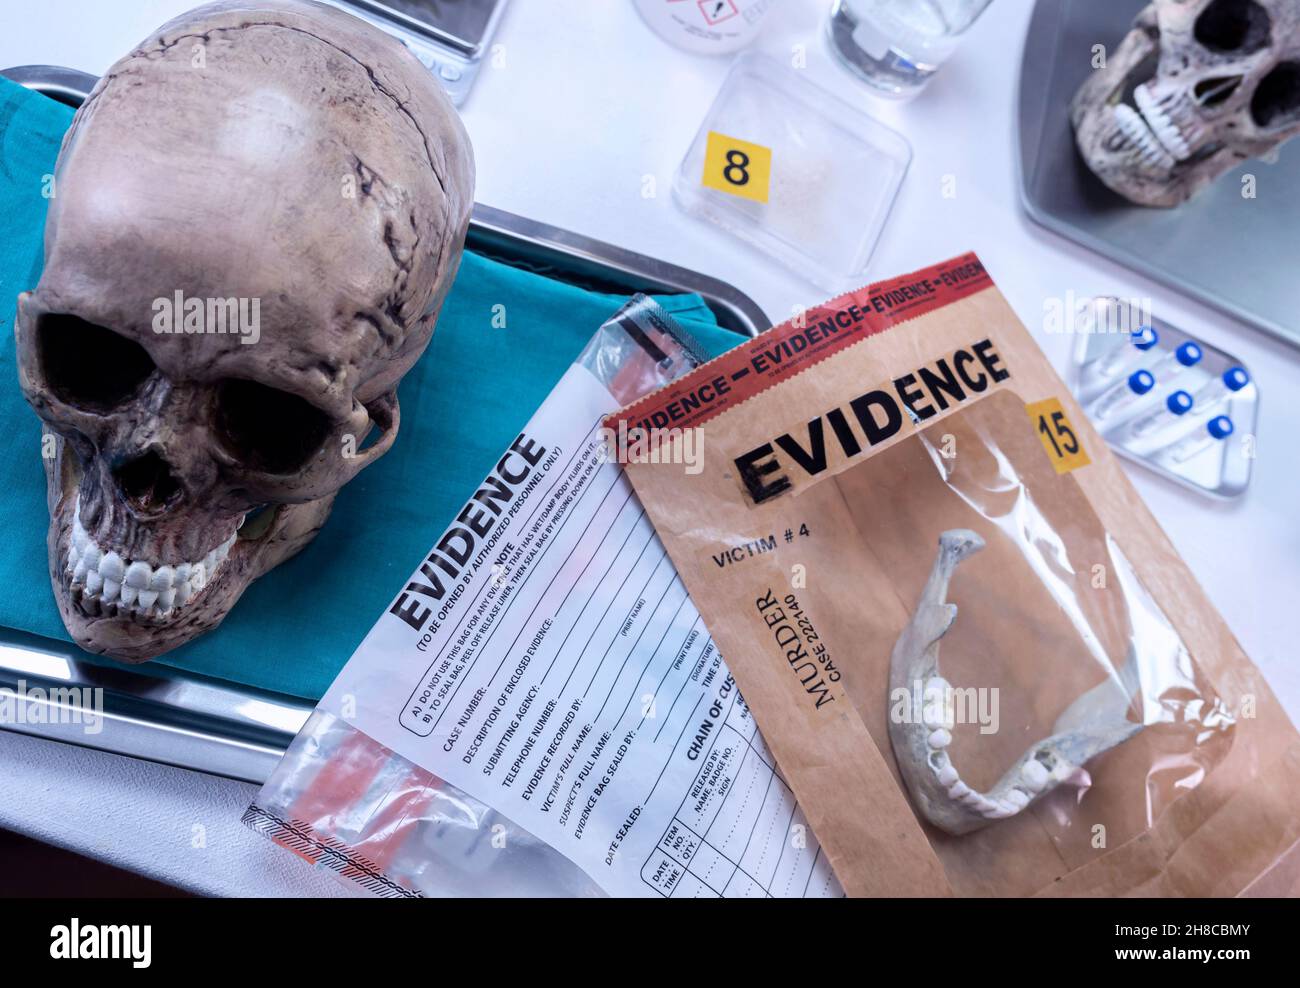 Human skull of a murdered adult in forensic lab, conceptual image Stock Photo